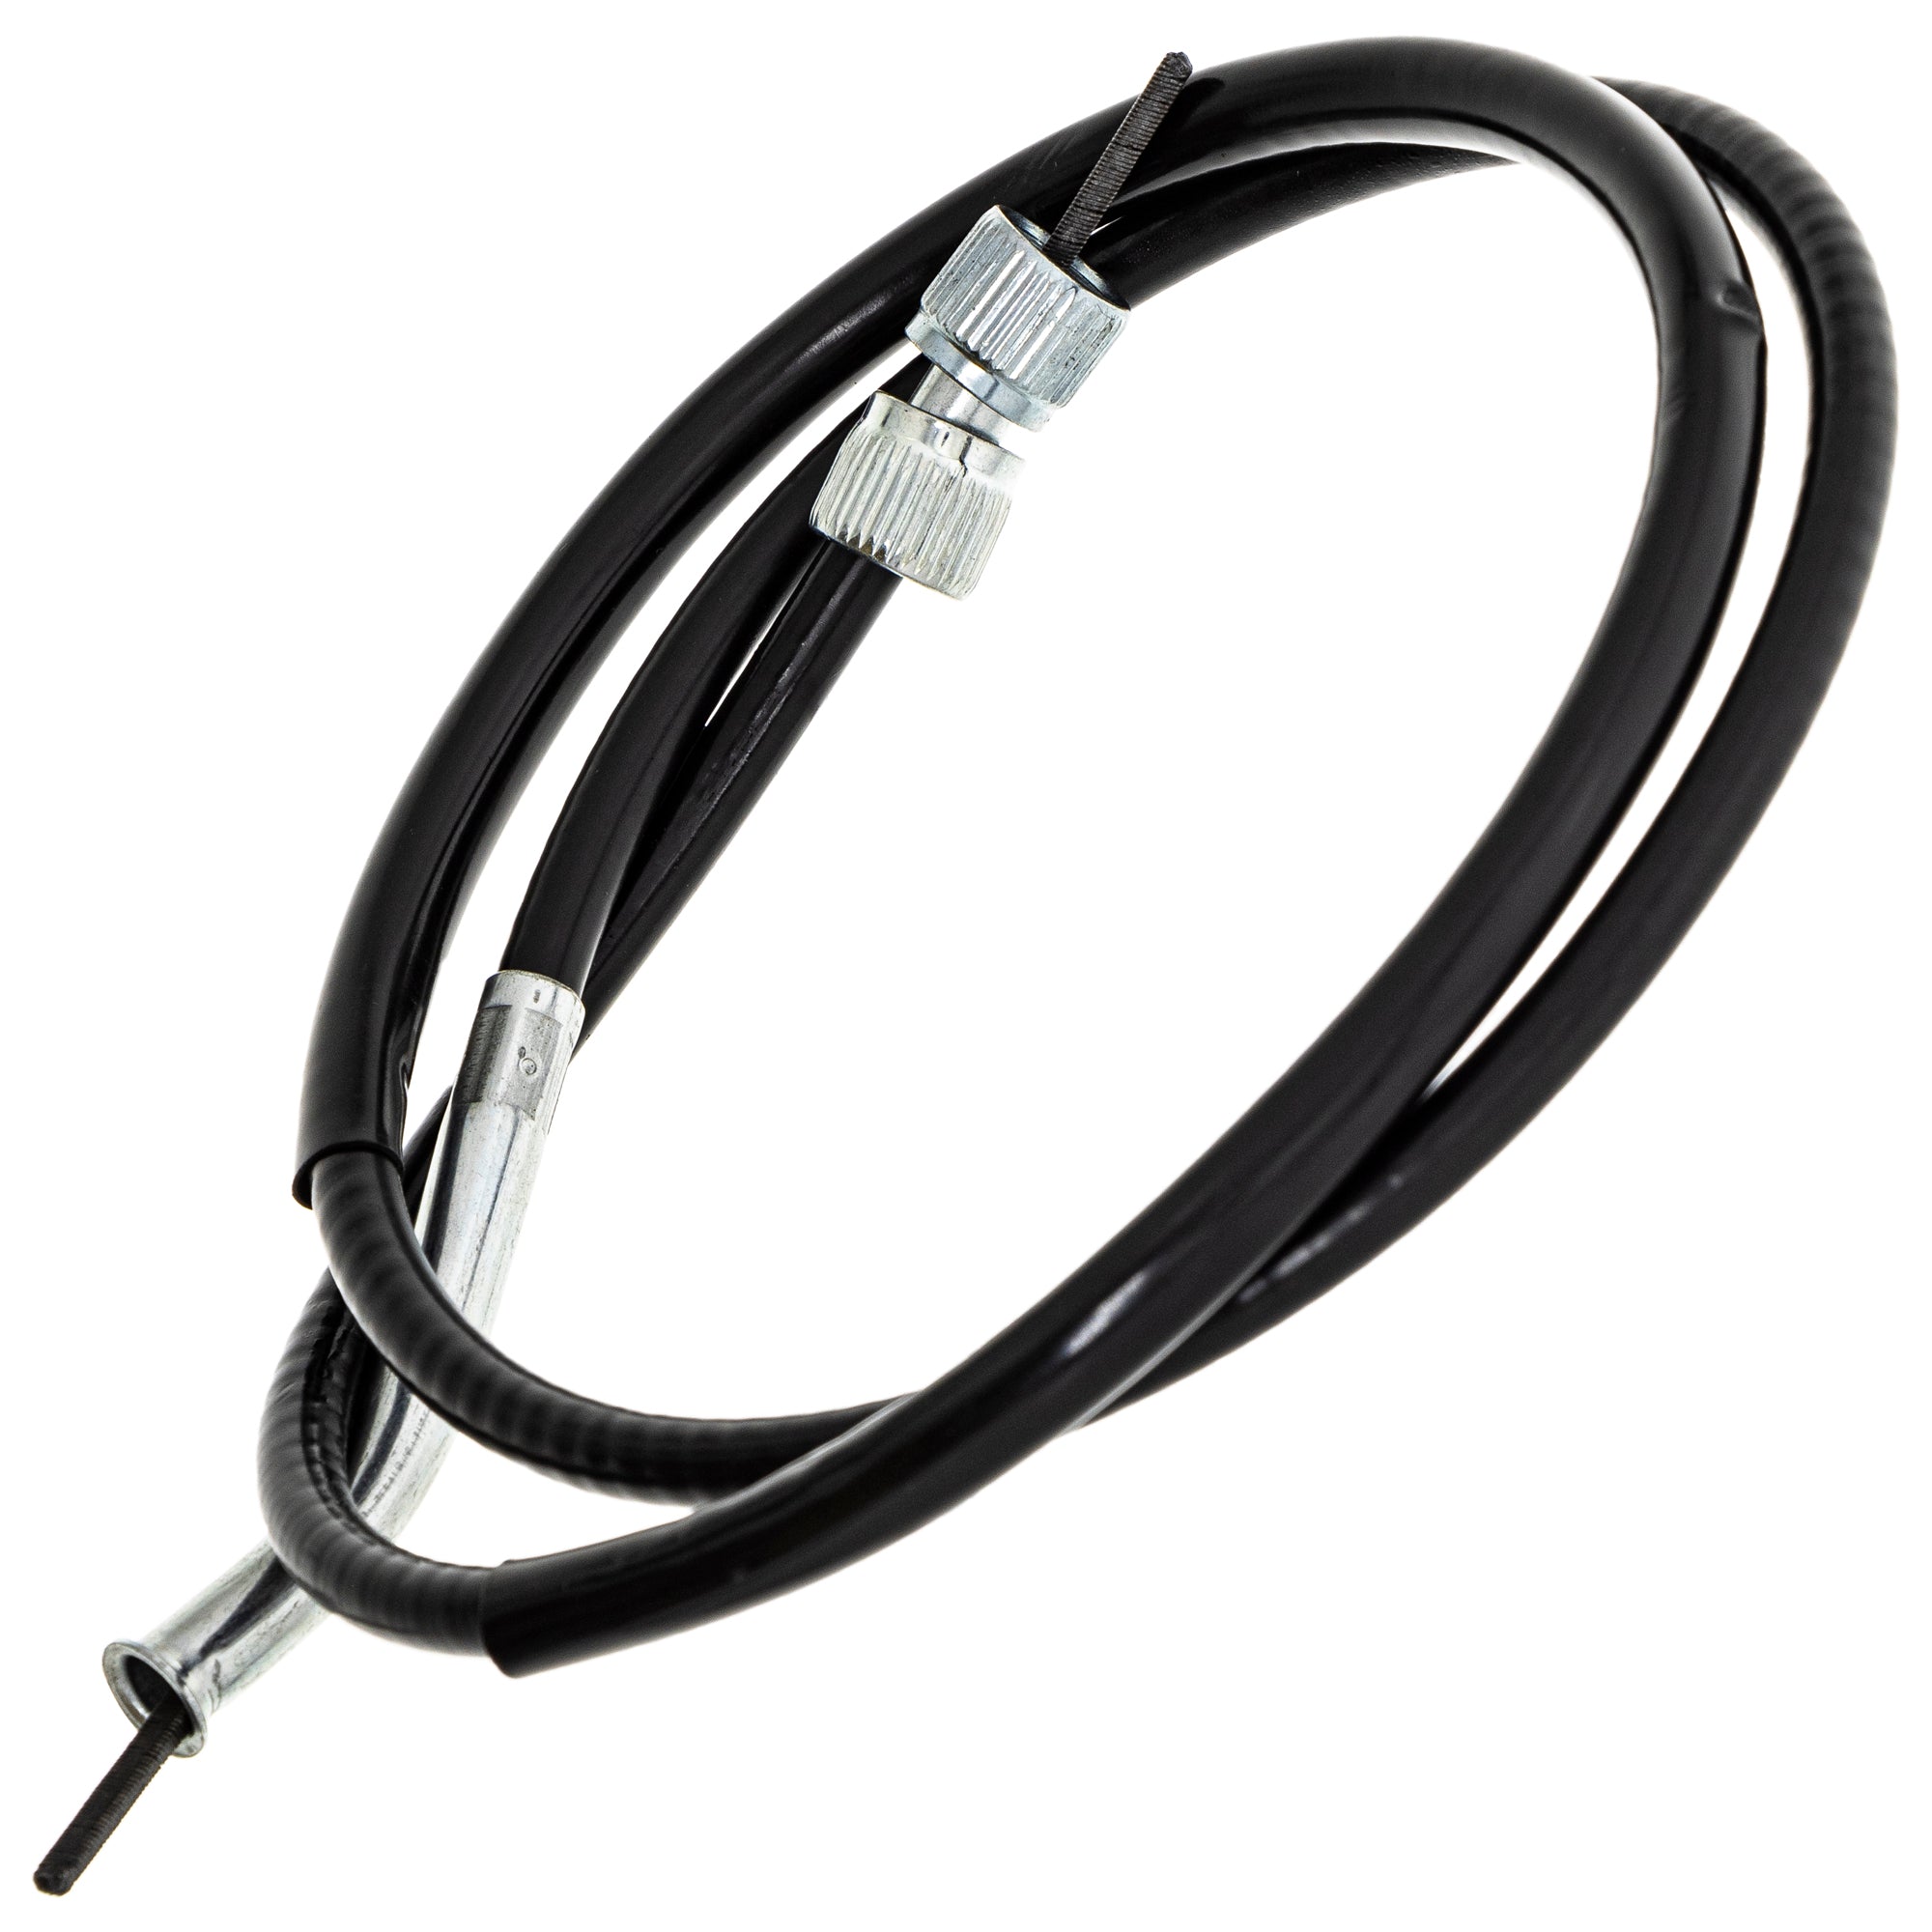 Speedometer Cable For Yamaha 3XP-83550-01-00 3XP-83550-00-00 1FK-83550-11-00 1FK-83550-10-00